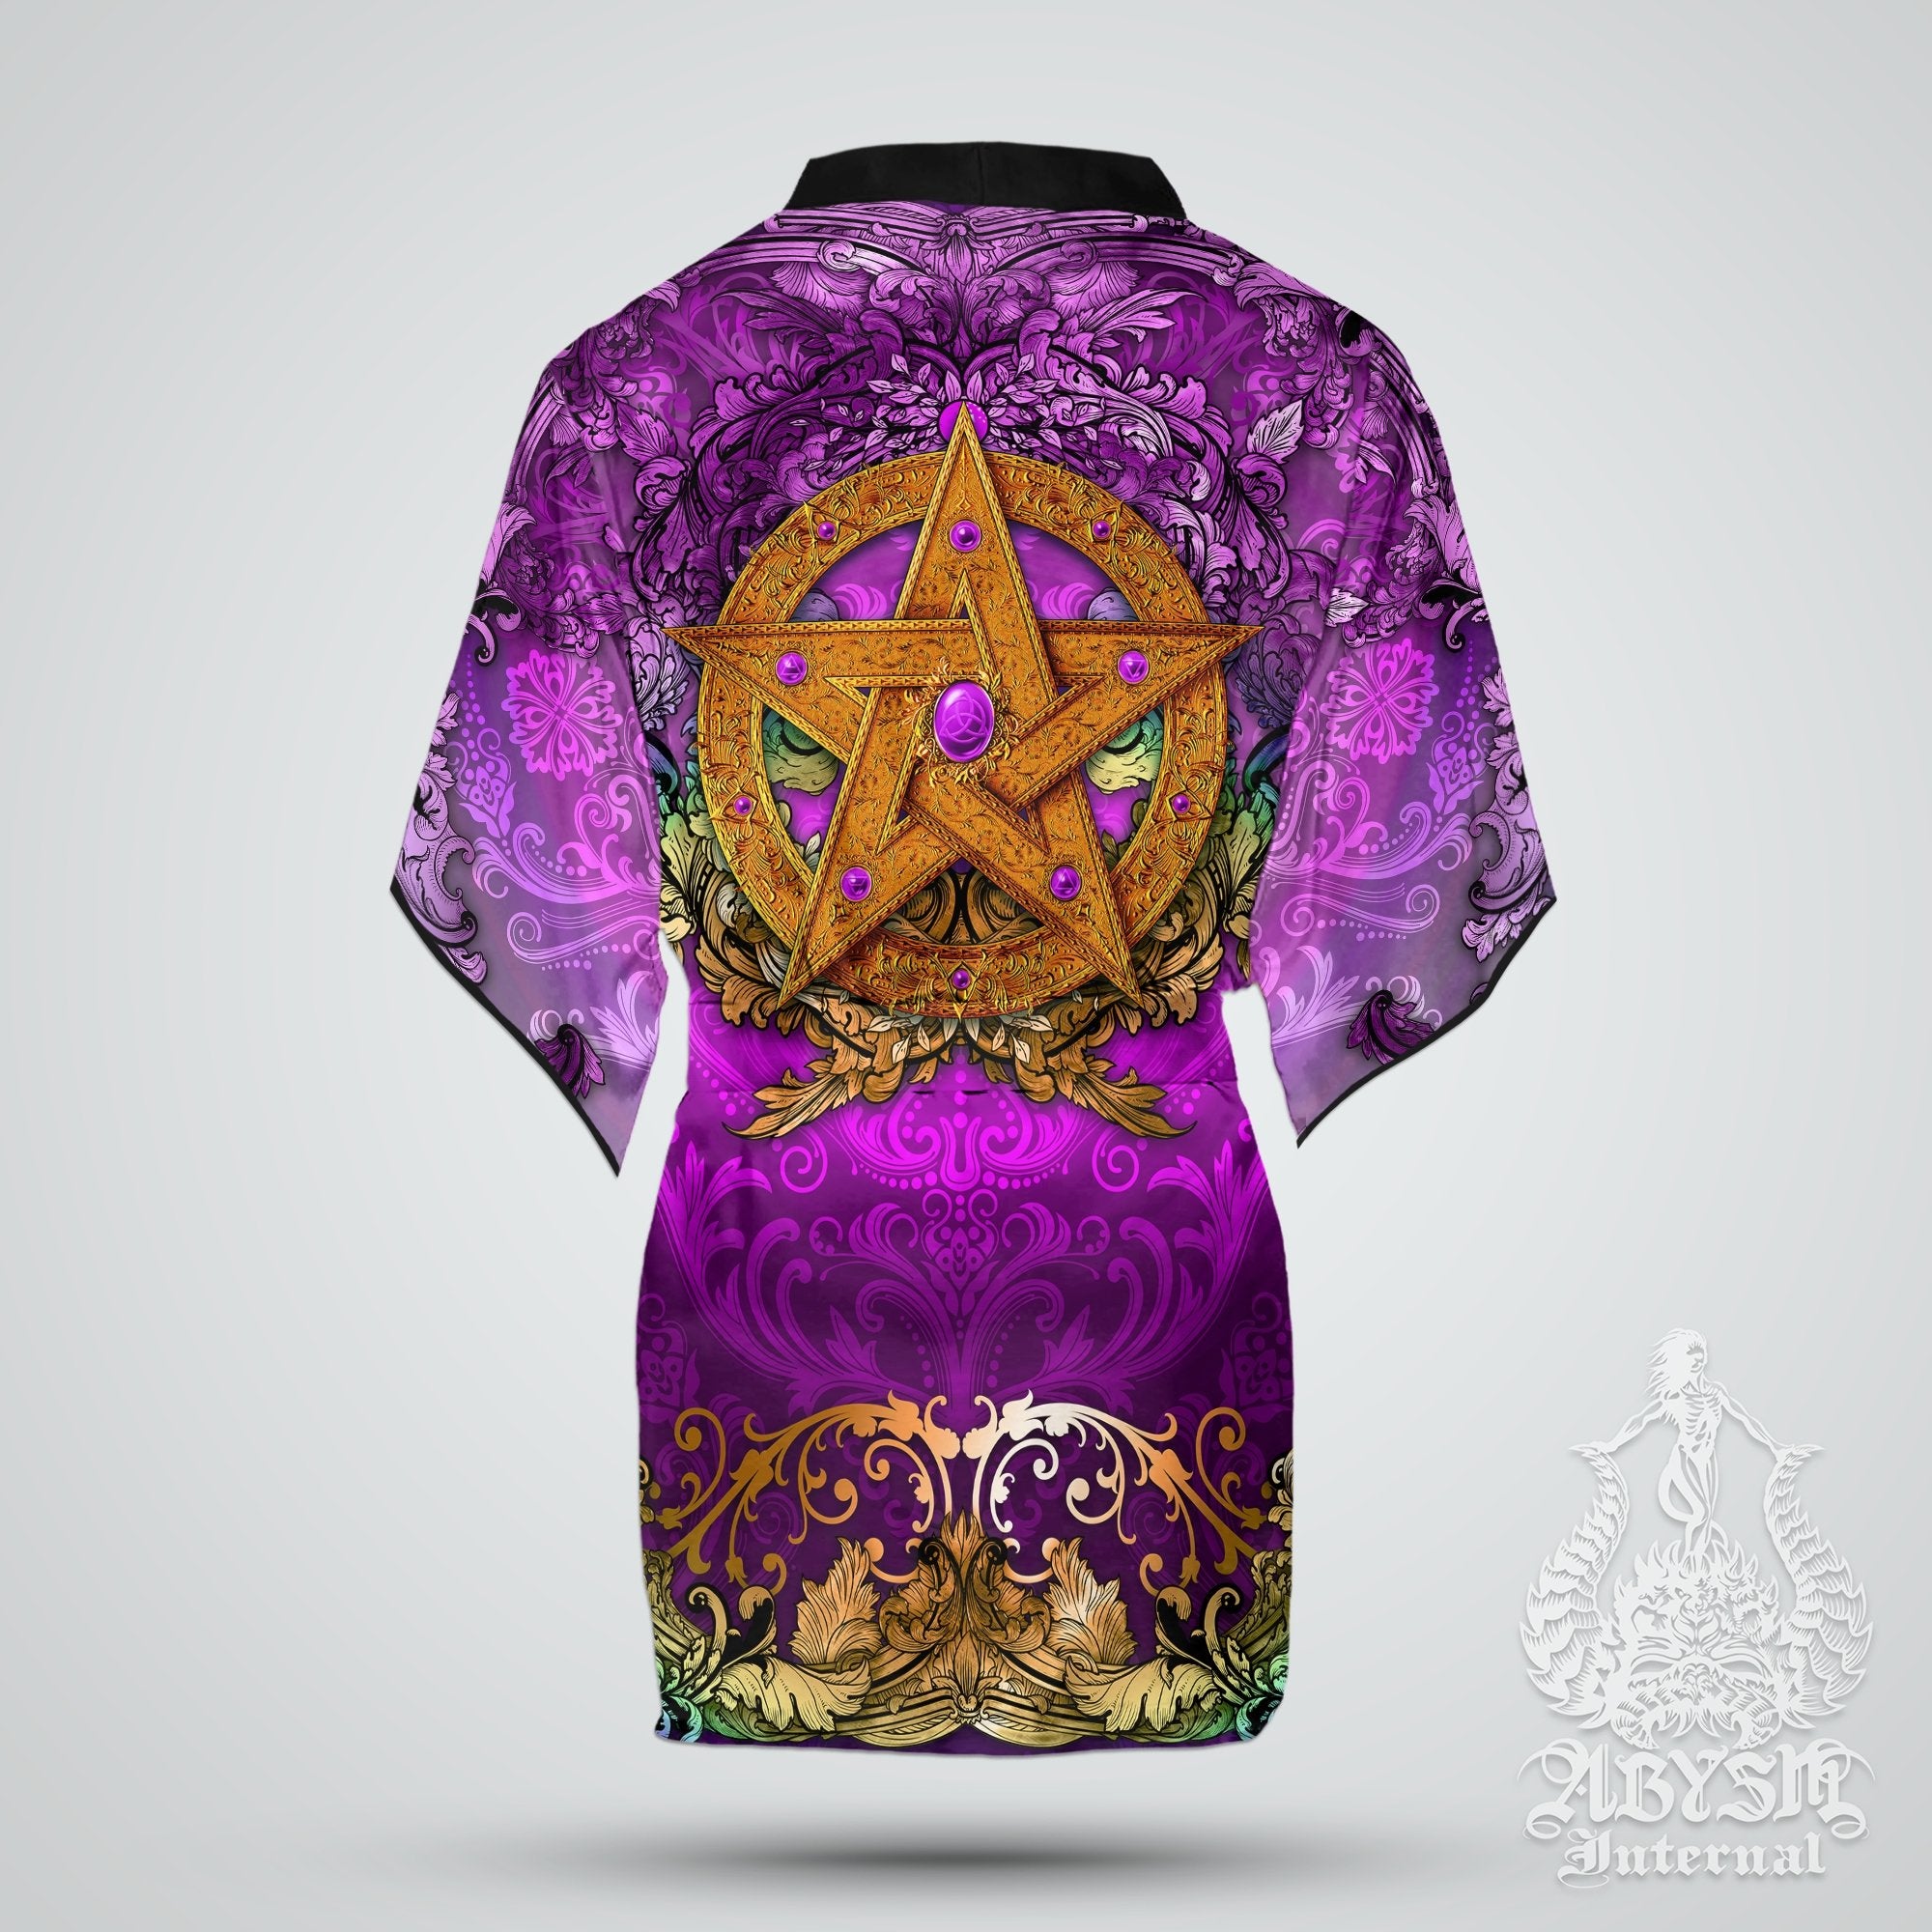 Pentacle Cover Up, Beach Outfit, Witch Party Kimono, Wicca Summer Festival Robe, Witchy Indie and Alternative Clothing, Unisex - Purple - Abysm Internal